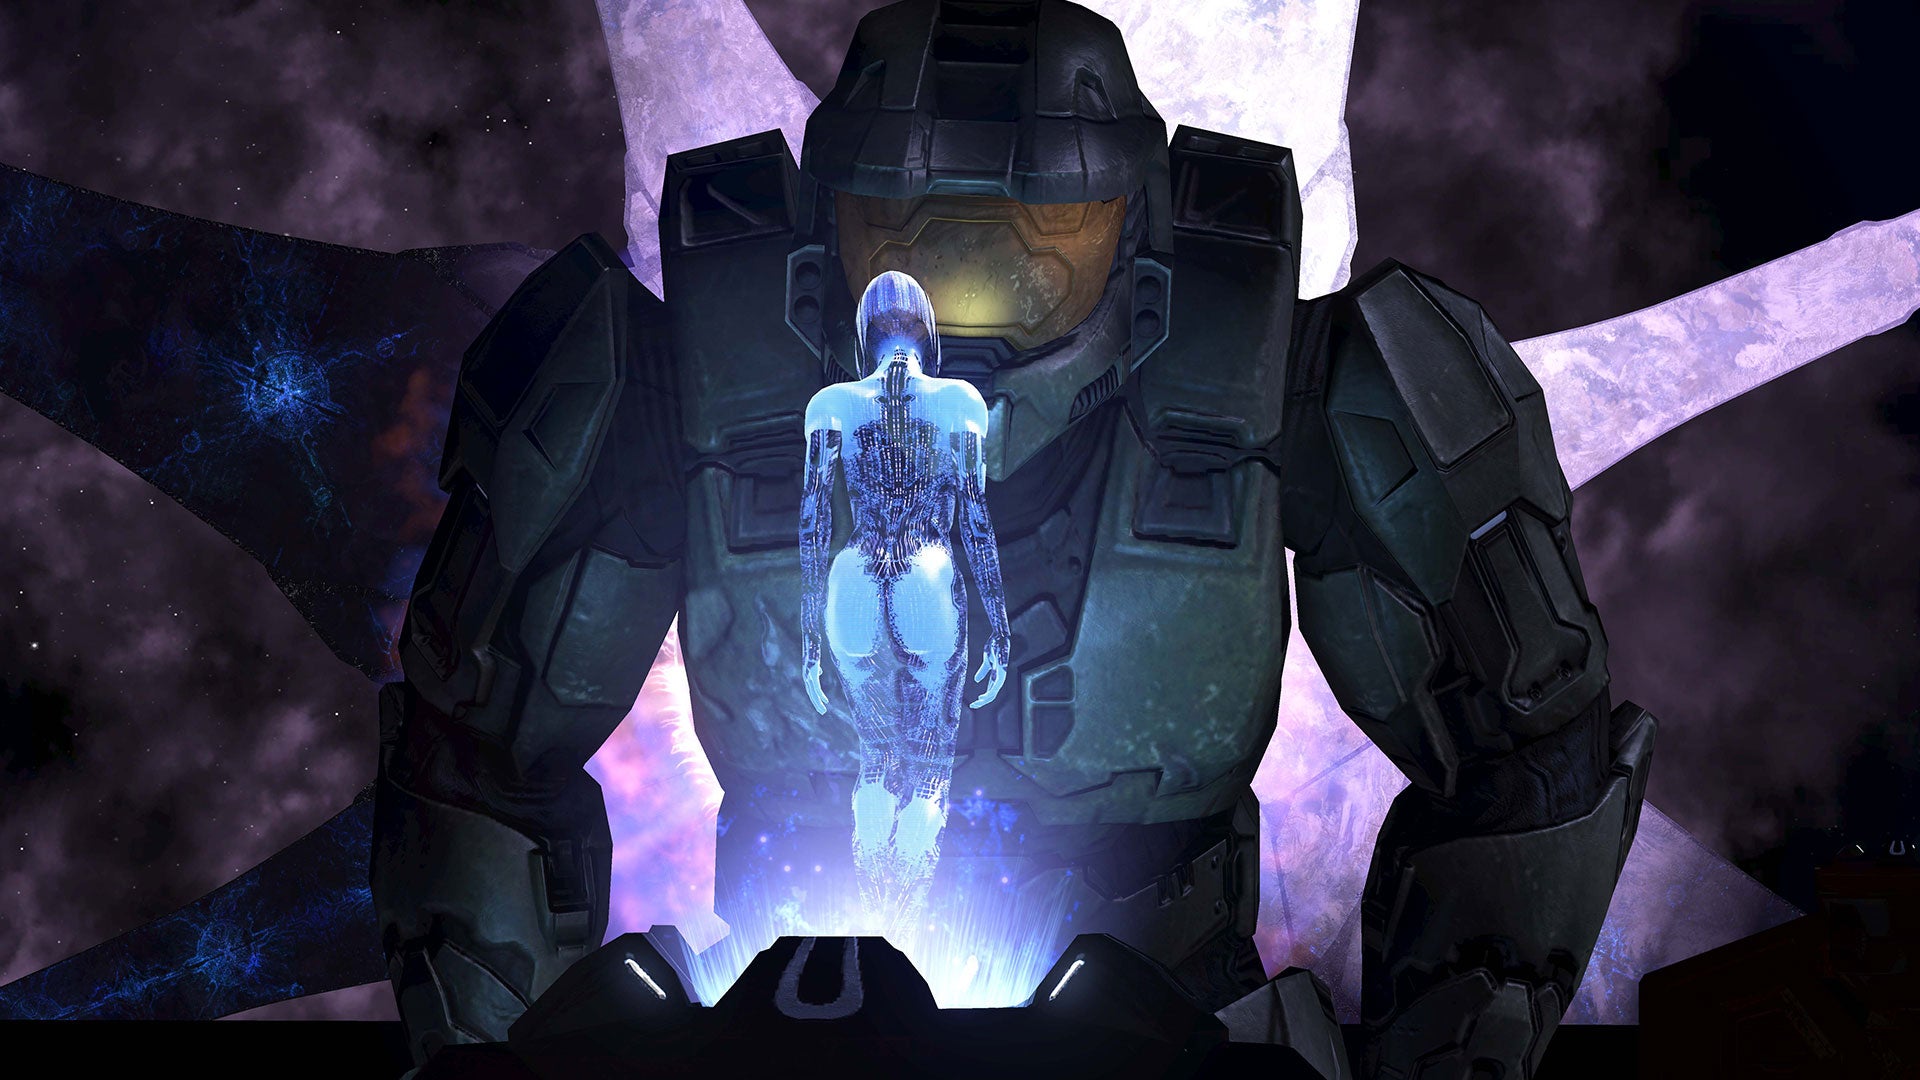 Image for Halo: The Master Chief Collection has 20GB day-one update, release moved up in UK